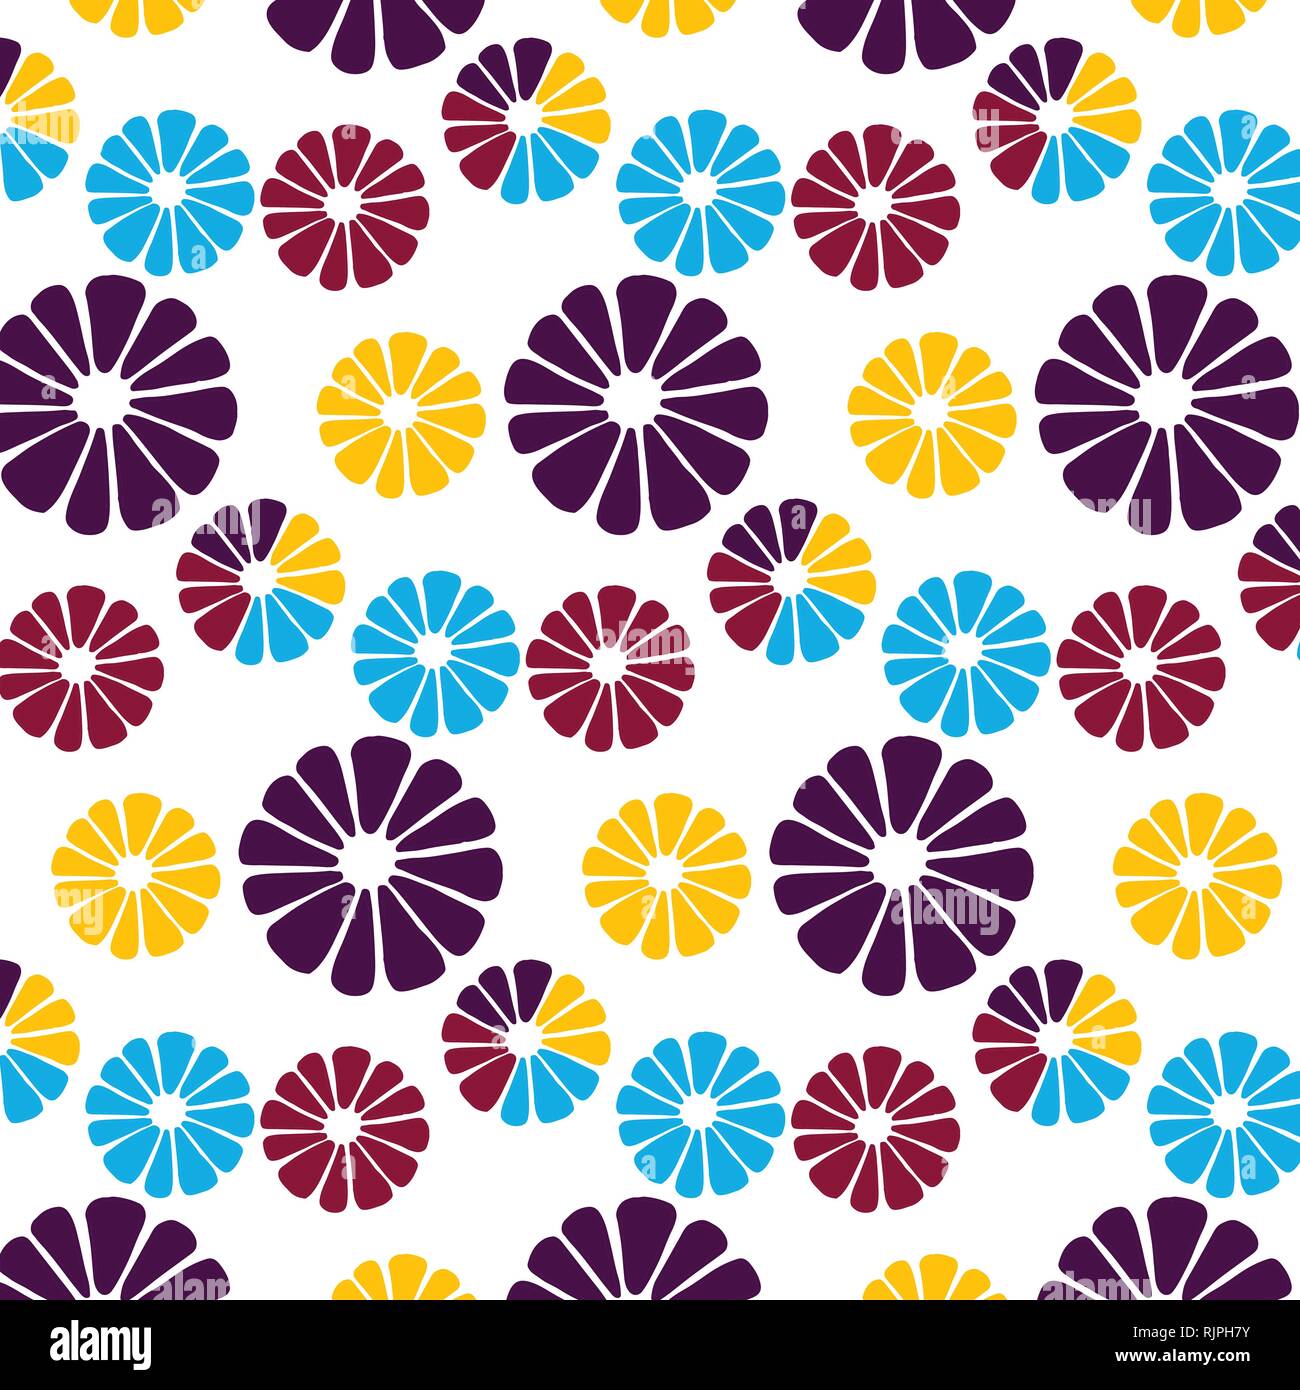 Vector pattern flowers in yellow, blue, orange and red colors palette on a white background Stock Vector